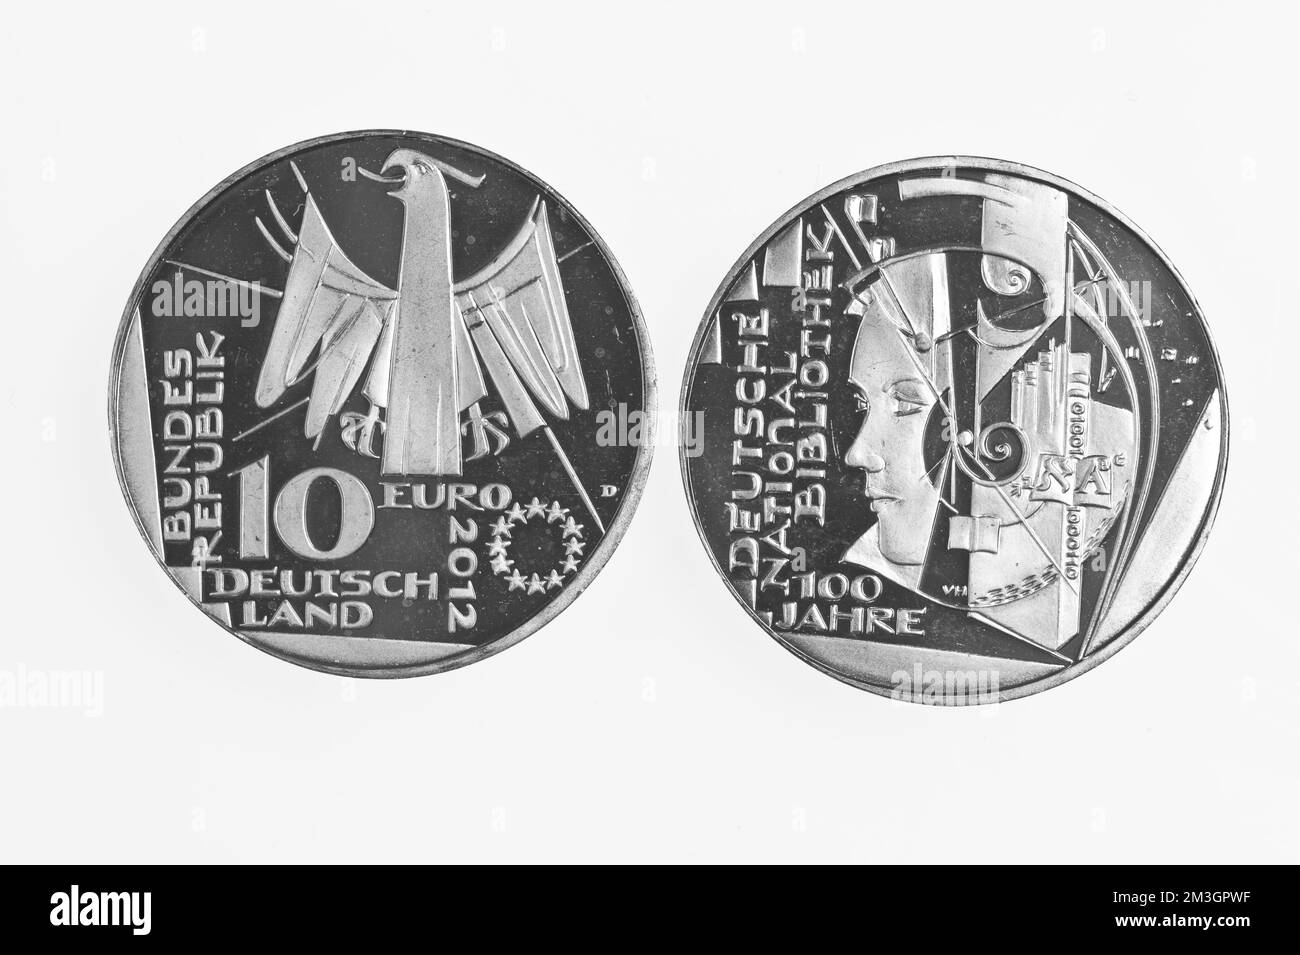 German coin Black and White Stock Photos & Images - Alamy